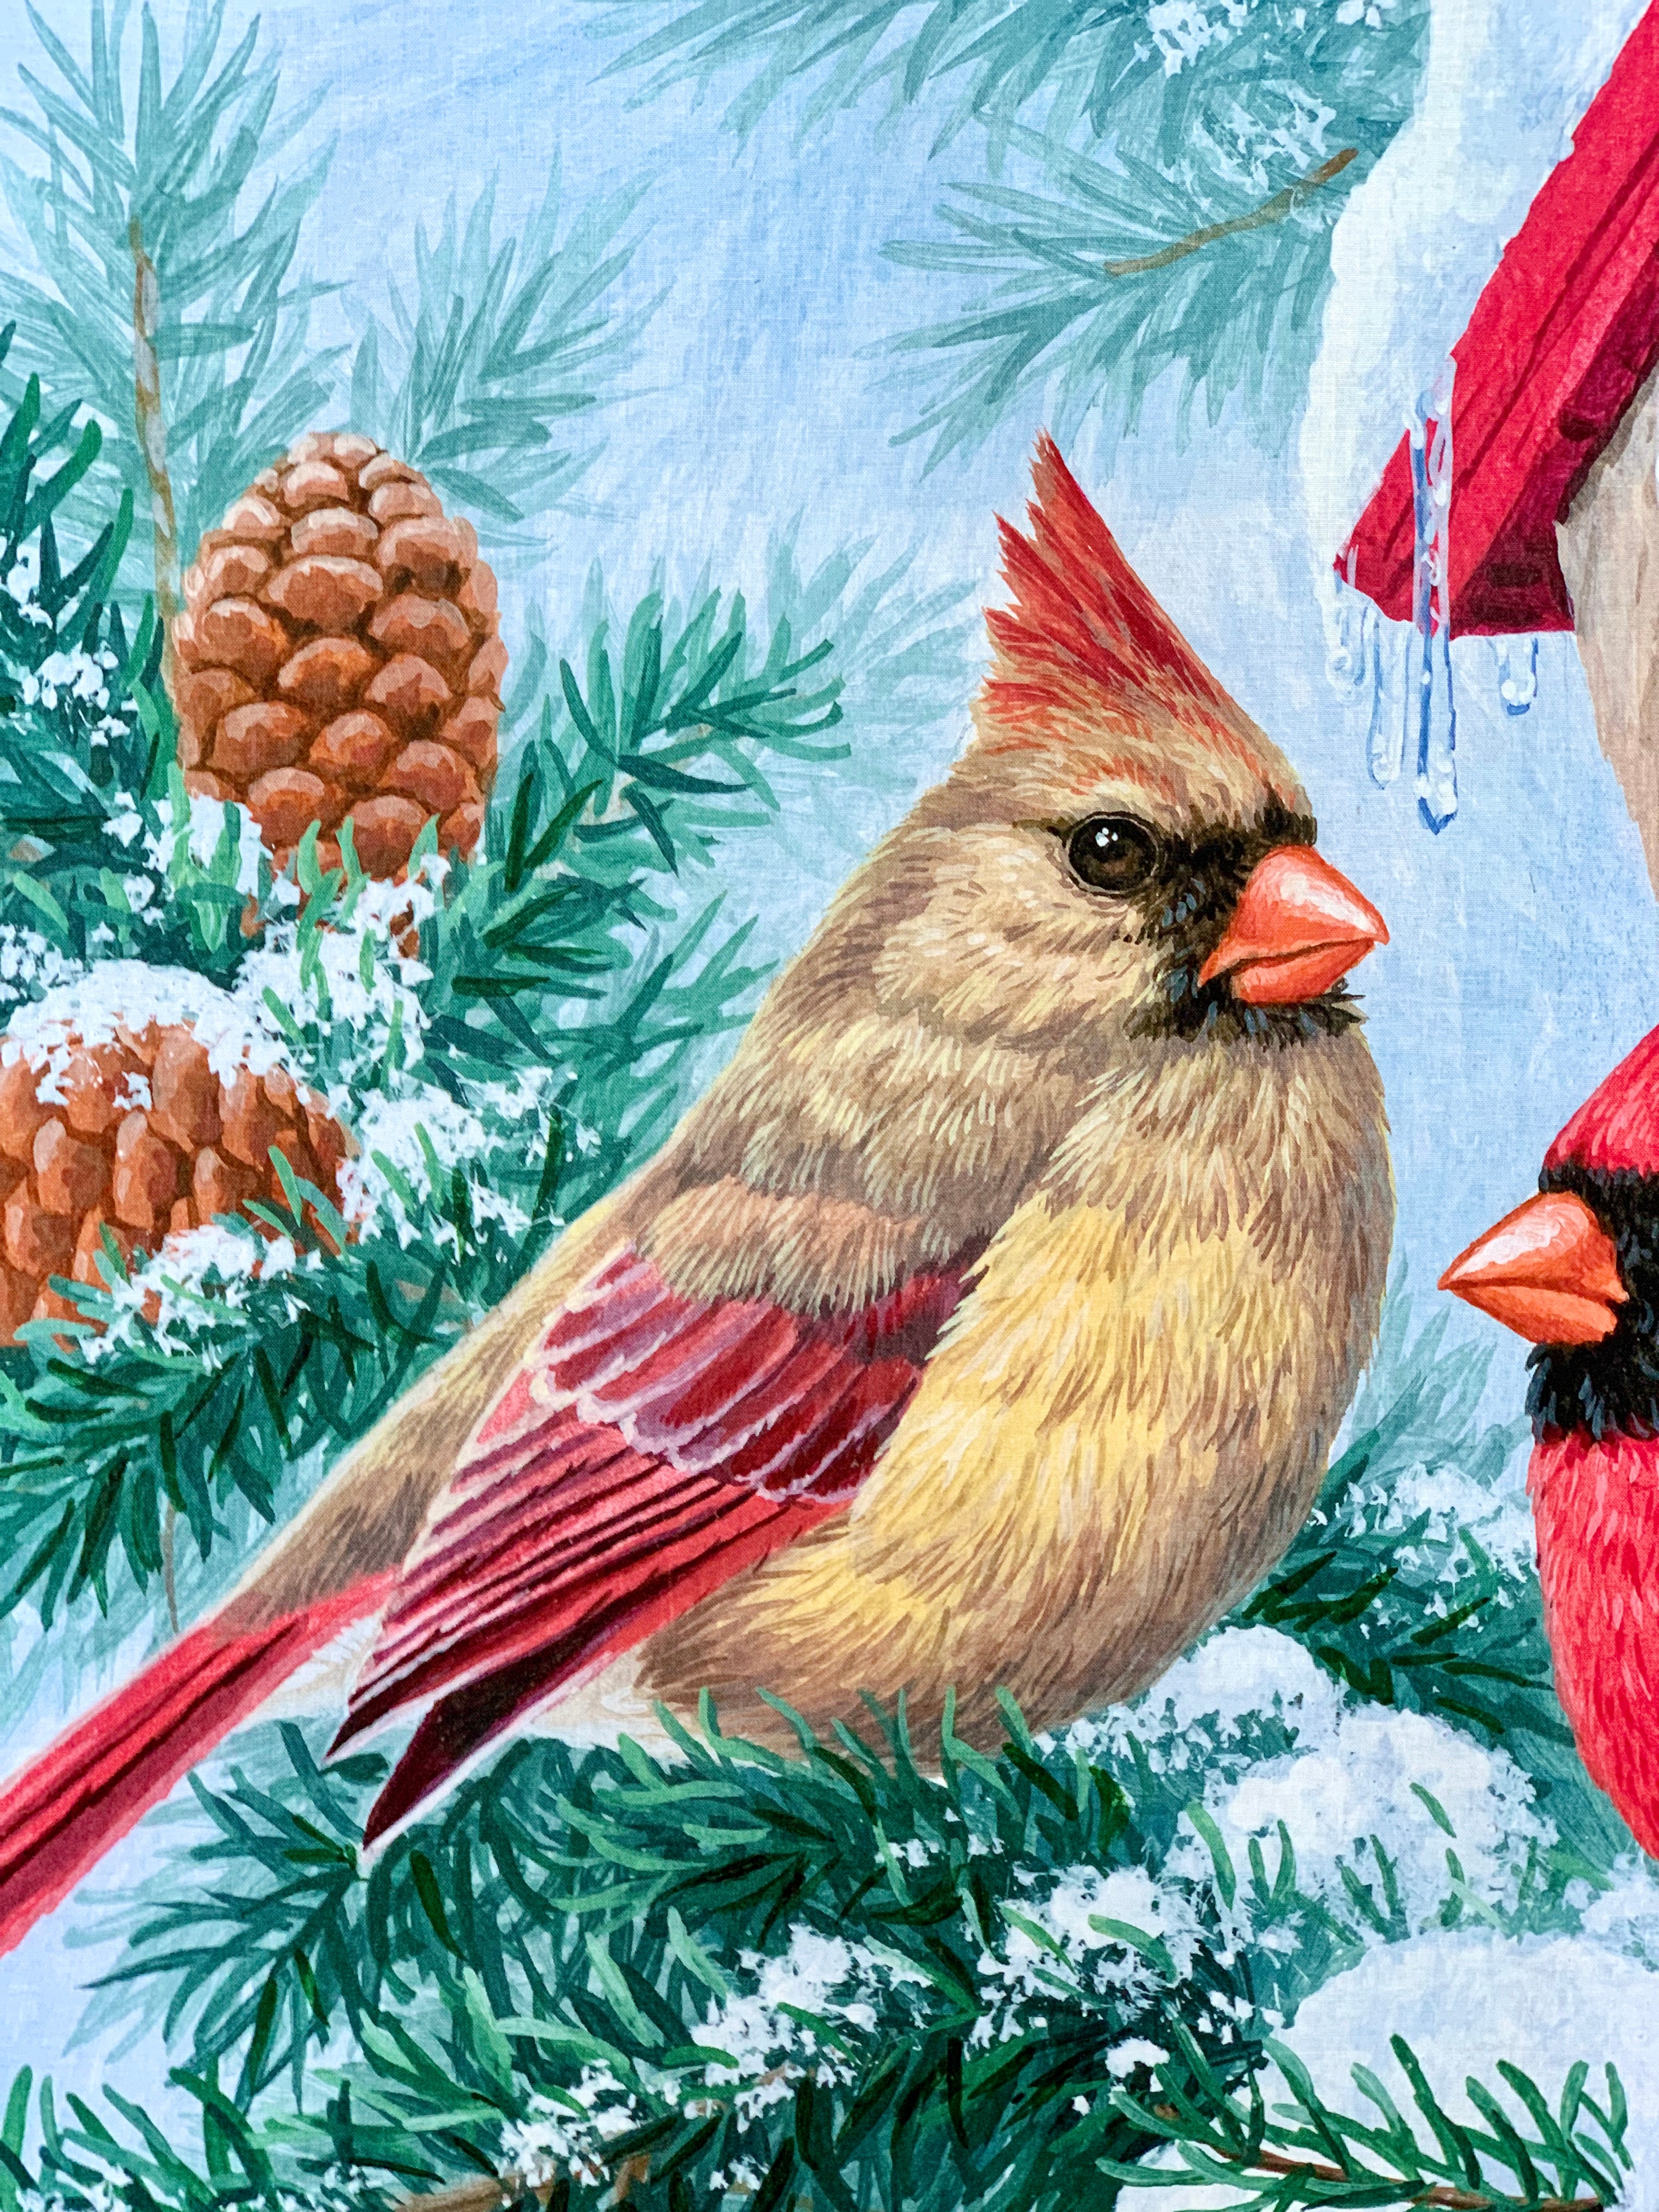 David Textiles Birds for all Seasons - Red Cardinals and Evergreens Panel and Fabric by the Yard - Christmas & Winter Fabric